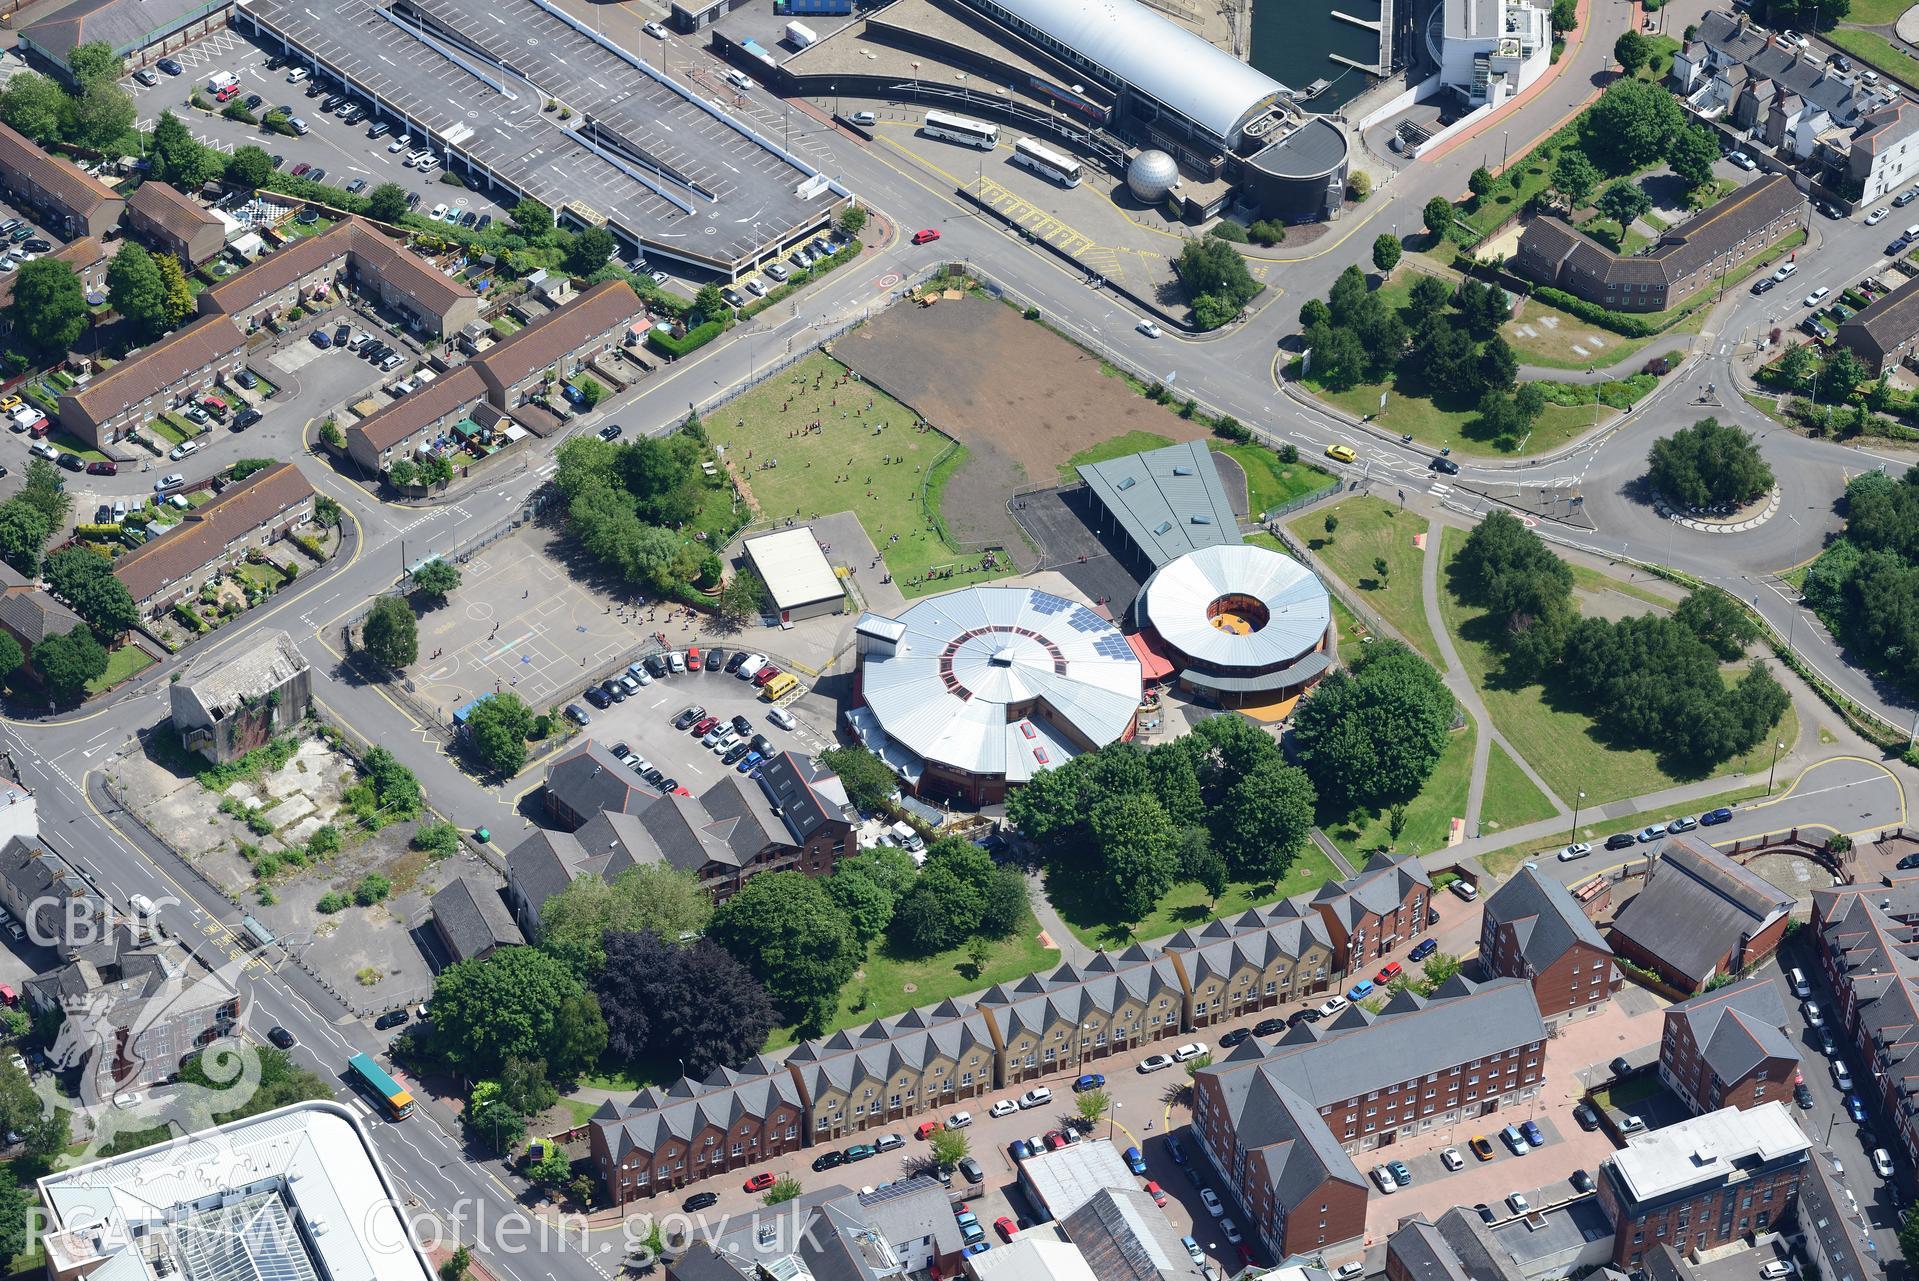 Mountstuart Primary School, Techniquest and St. David's Hotel, Butetown, Cardiff Bay. Oblique aerial photograph taken during the Royal Commission's programme of archaeological aerial reconnaissance by Toby Driver on 29th June 2015.